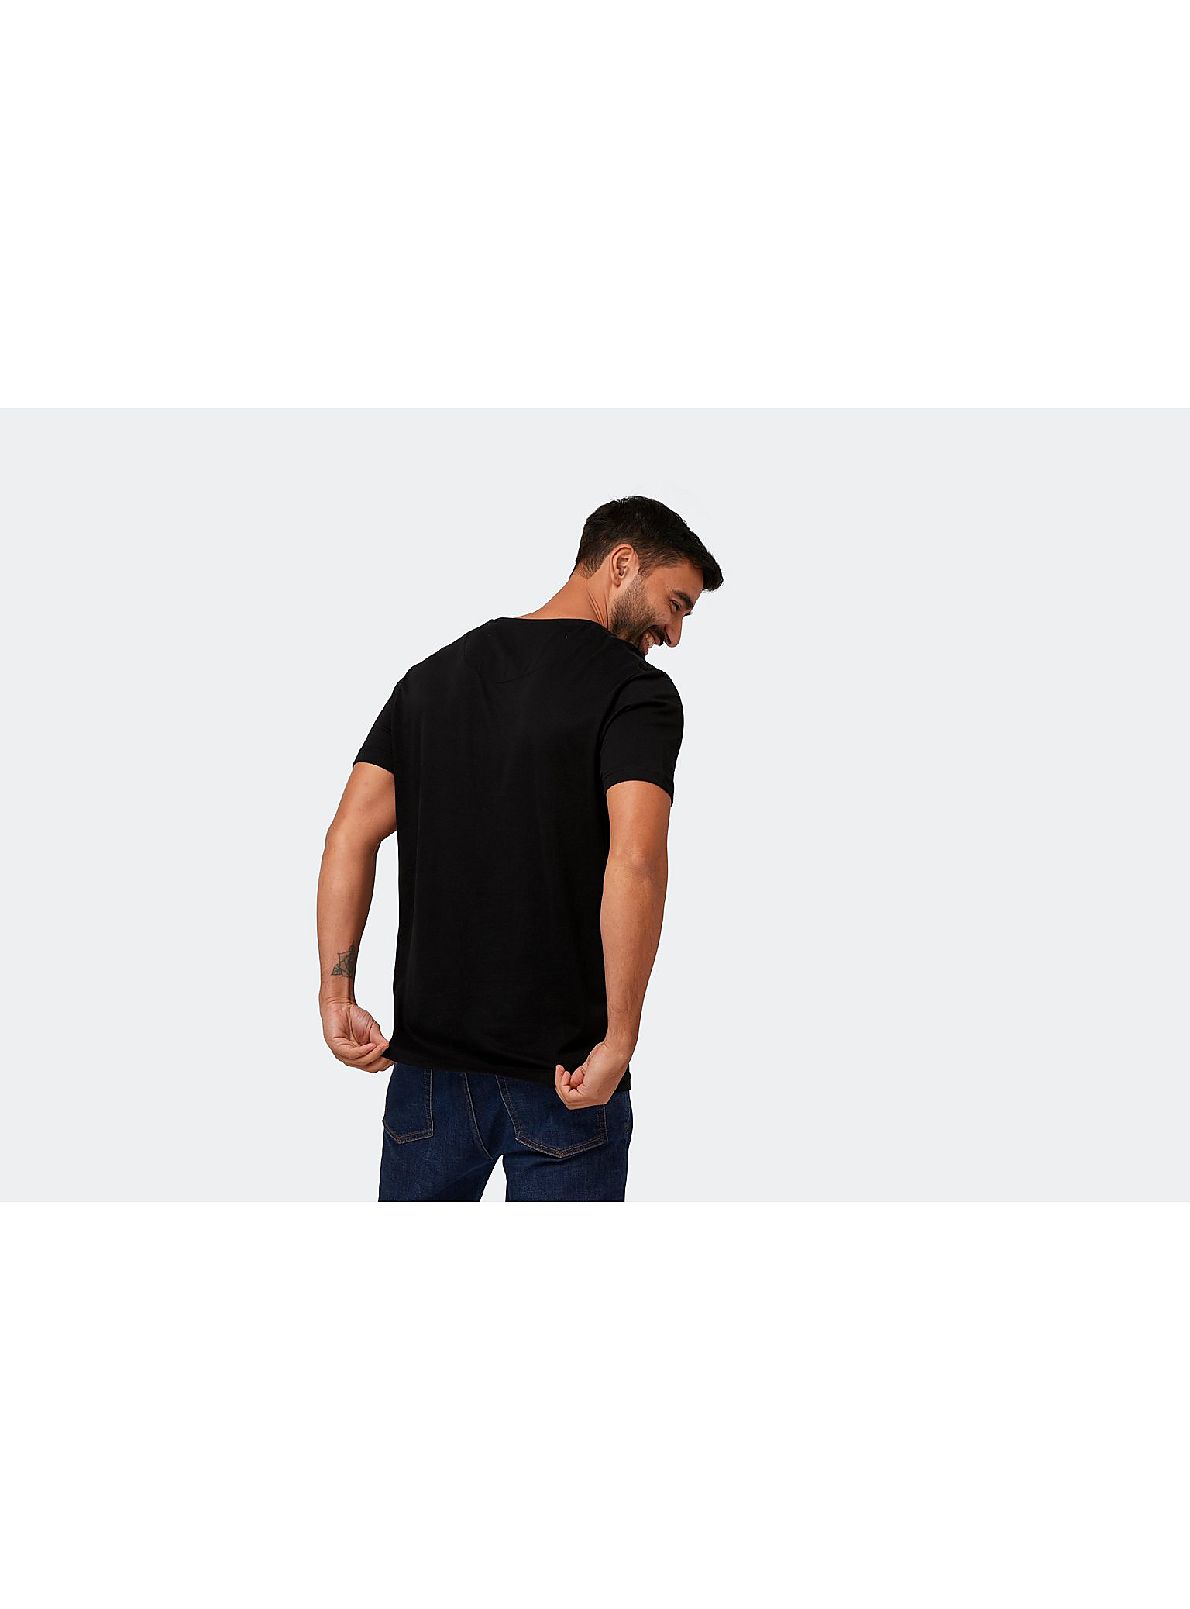 Arsenal 1886 Gothic Text Black T-Shirt | Official Online Store